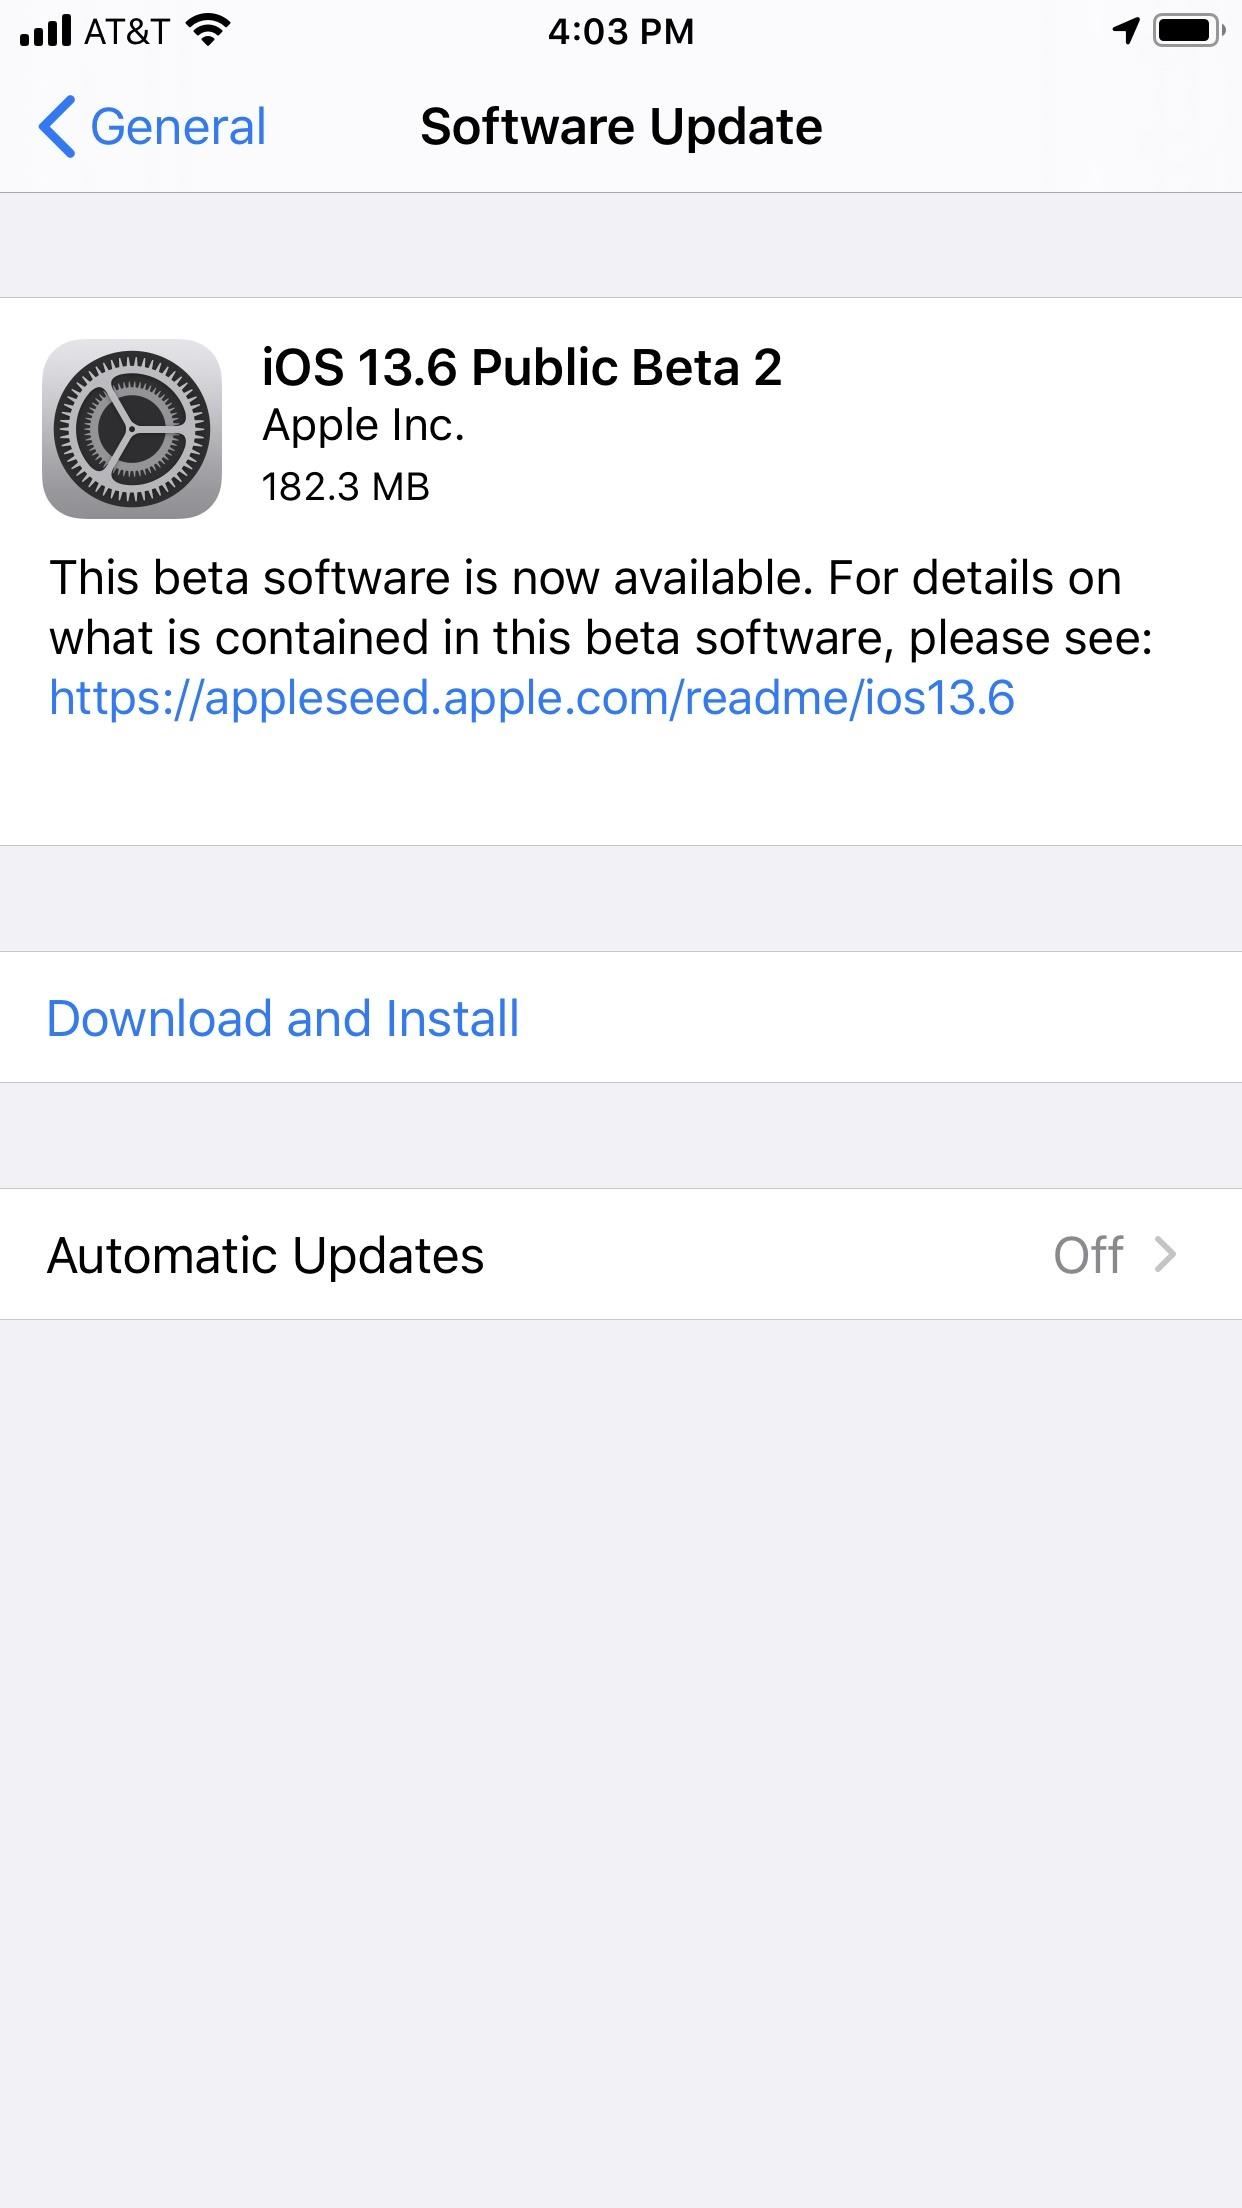 Apple's iOS 13.6 Public Beta 2 for iPhone Includes Option to Automatically Download New Updates